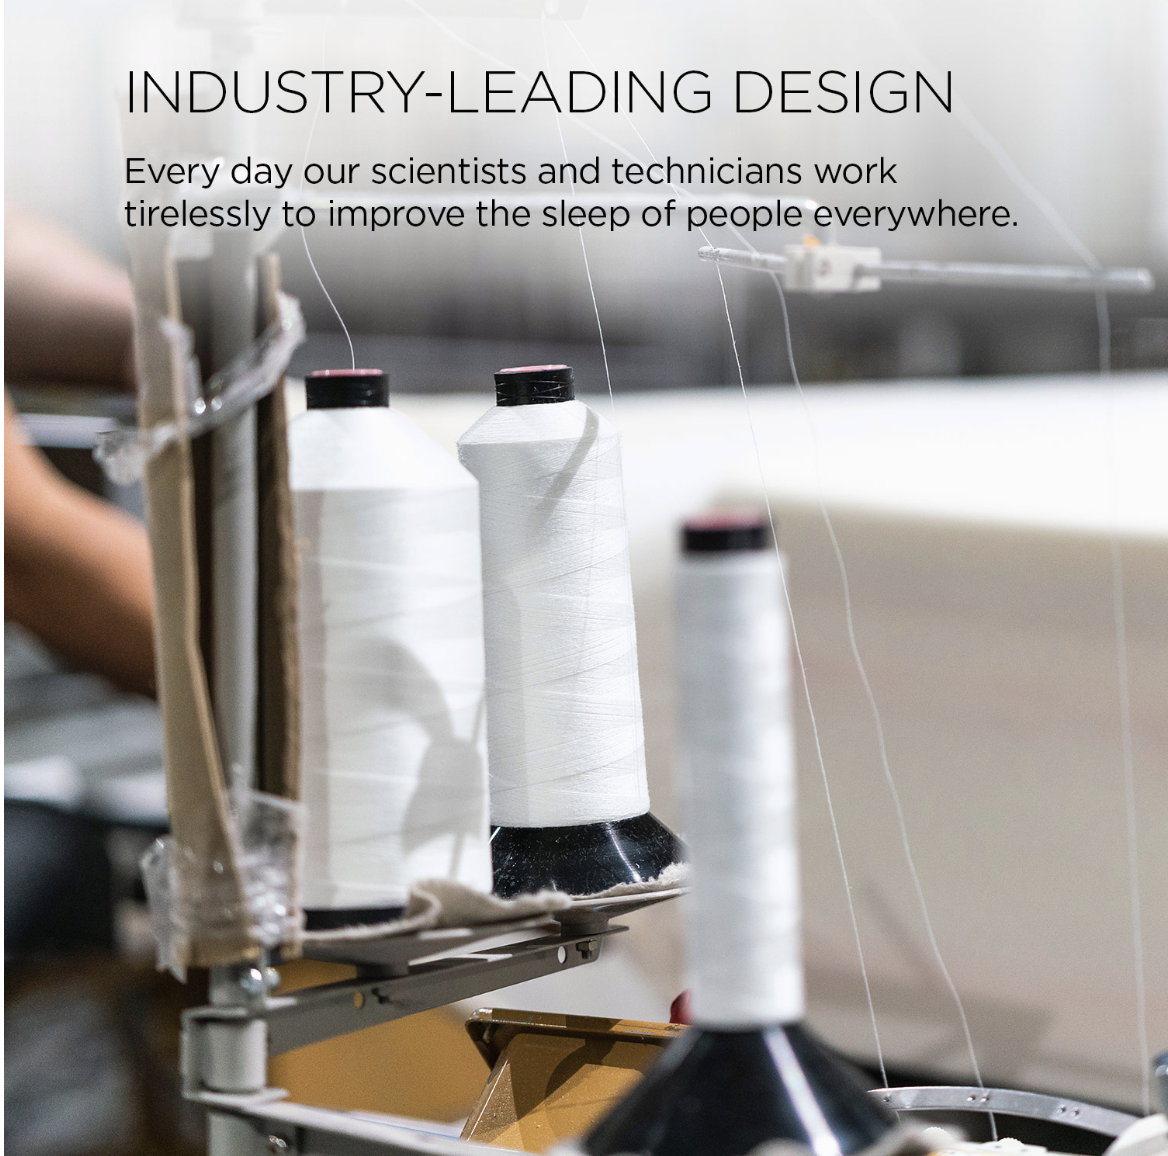 Industry-Leading Design - Every day our scientists and technicians work tirelessly to improve the sleep of people everywhere - Shop Tempur-Pedic